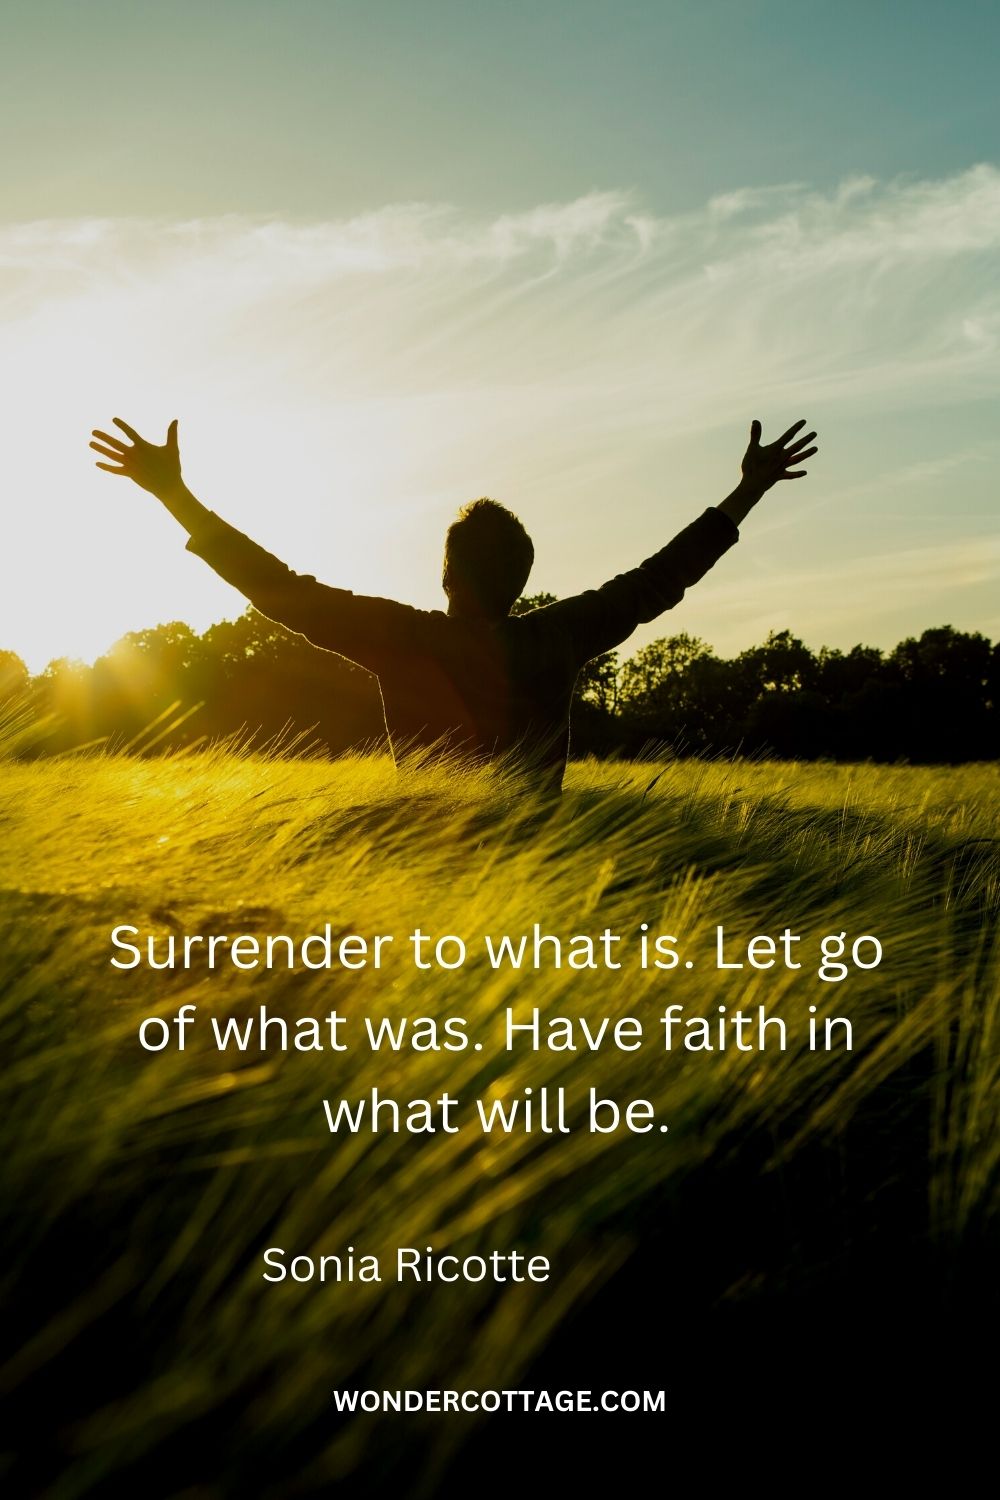 Surrender to what is. Let go of what was. Have faith in what will be. Sonia Ricotte